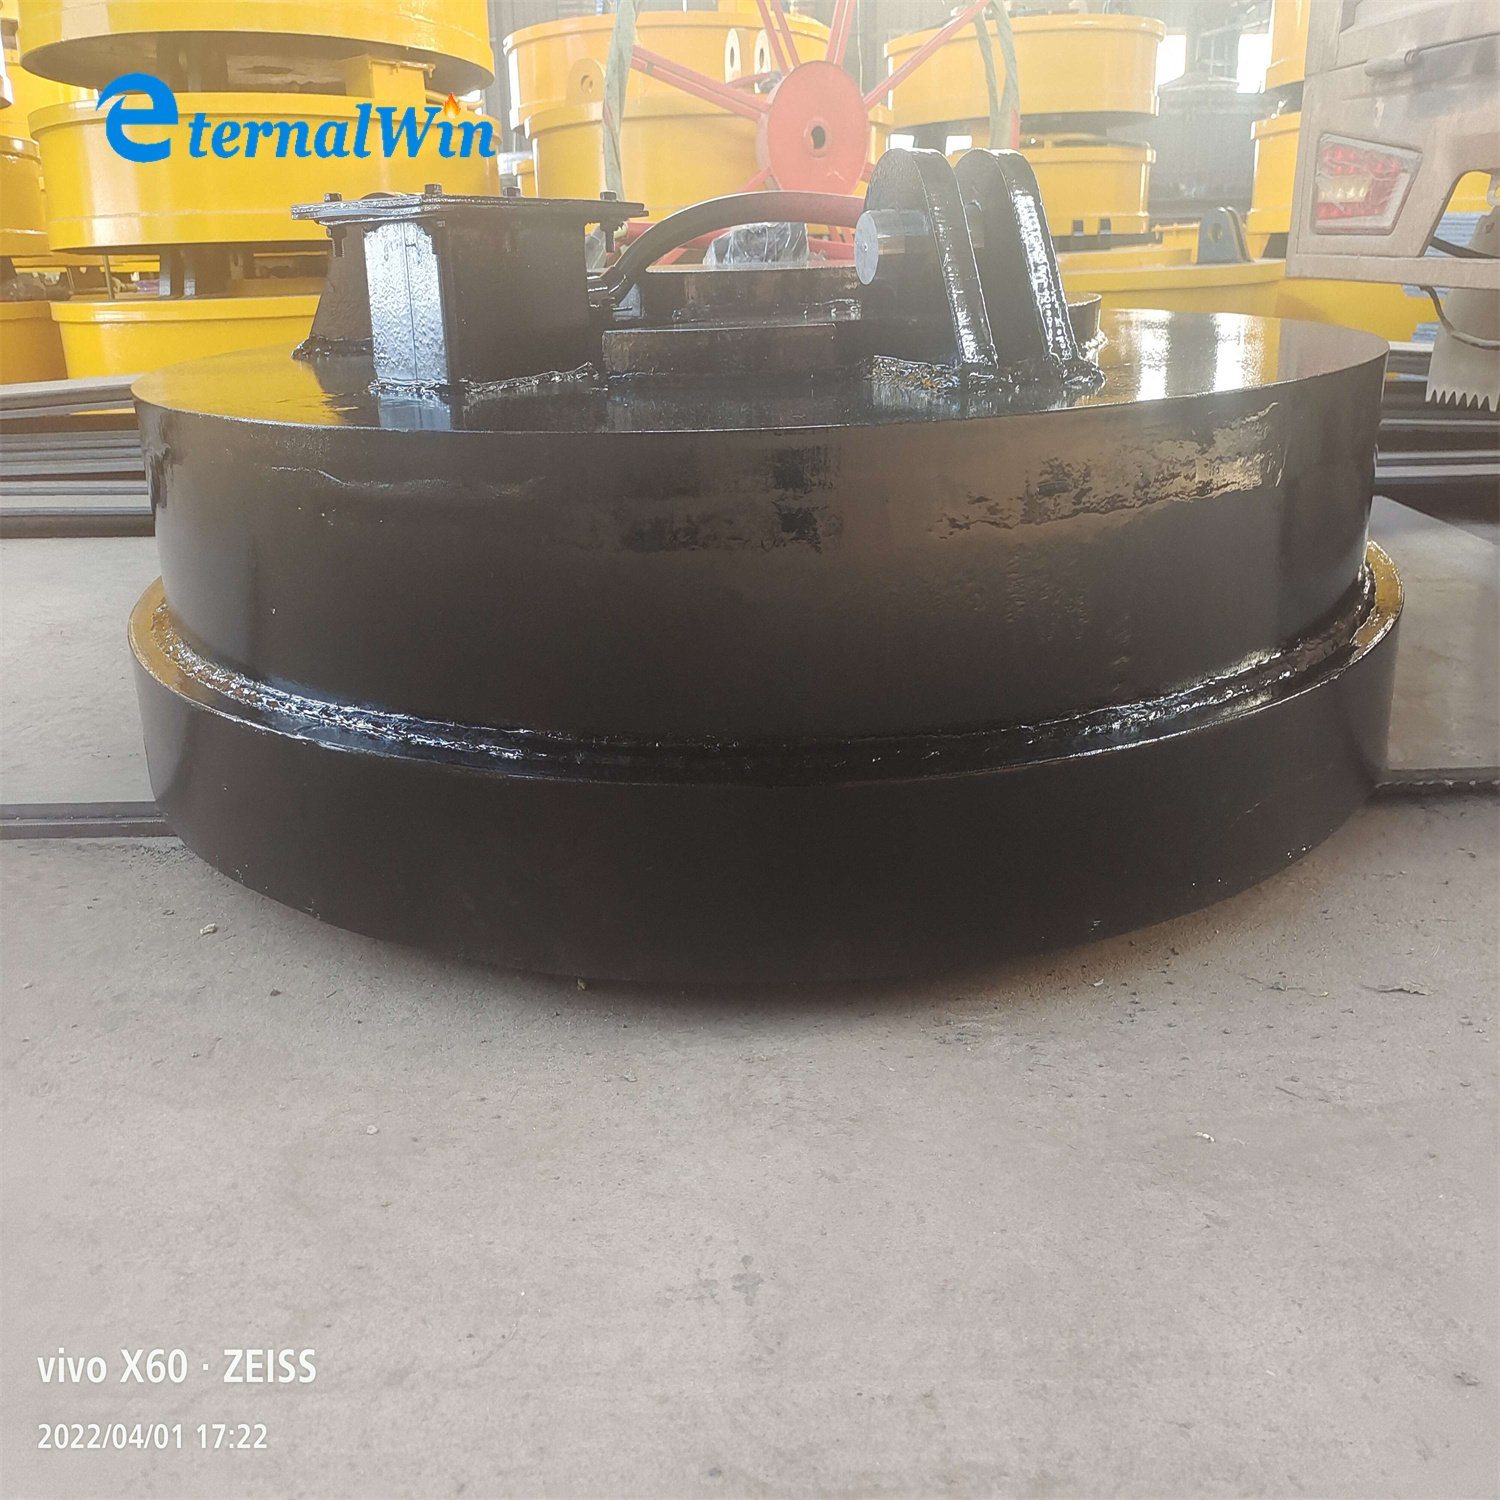 Lifting Electromagnet for Handling Scrapped Steels, Crane Magnet for Lifting Steel Metal Scrap, Electric Lifting Magnetic Lifter